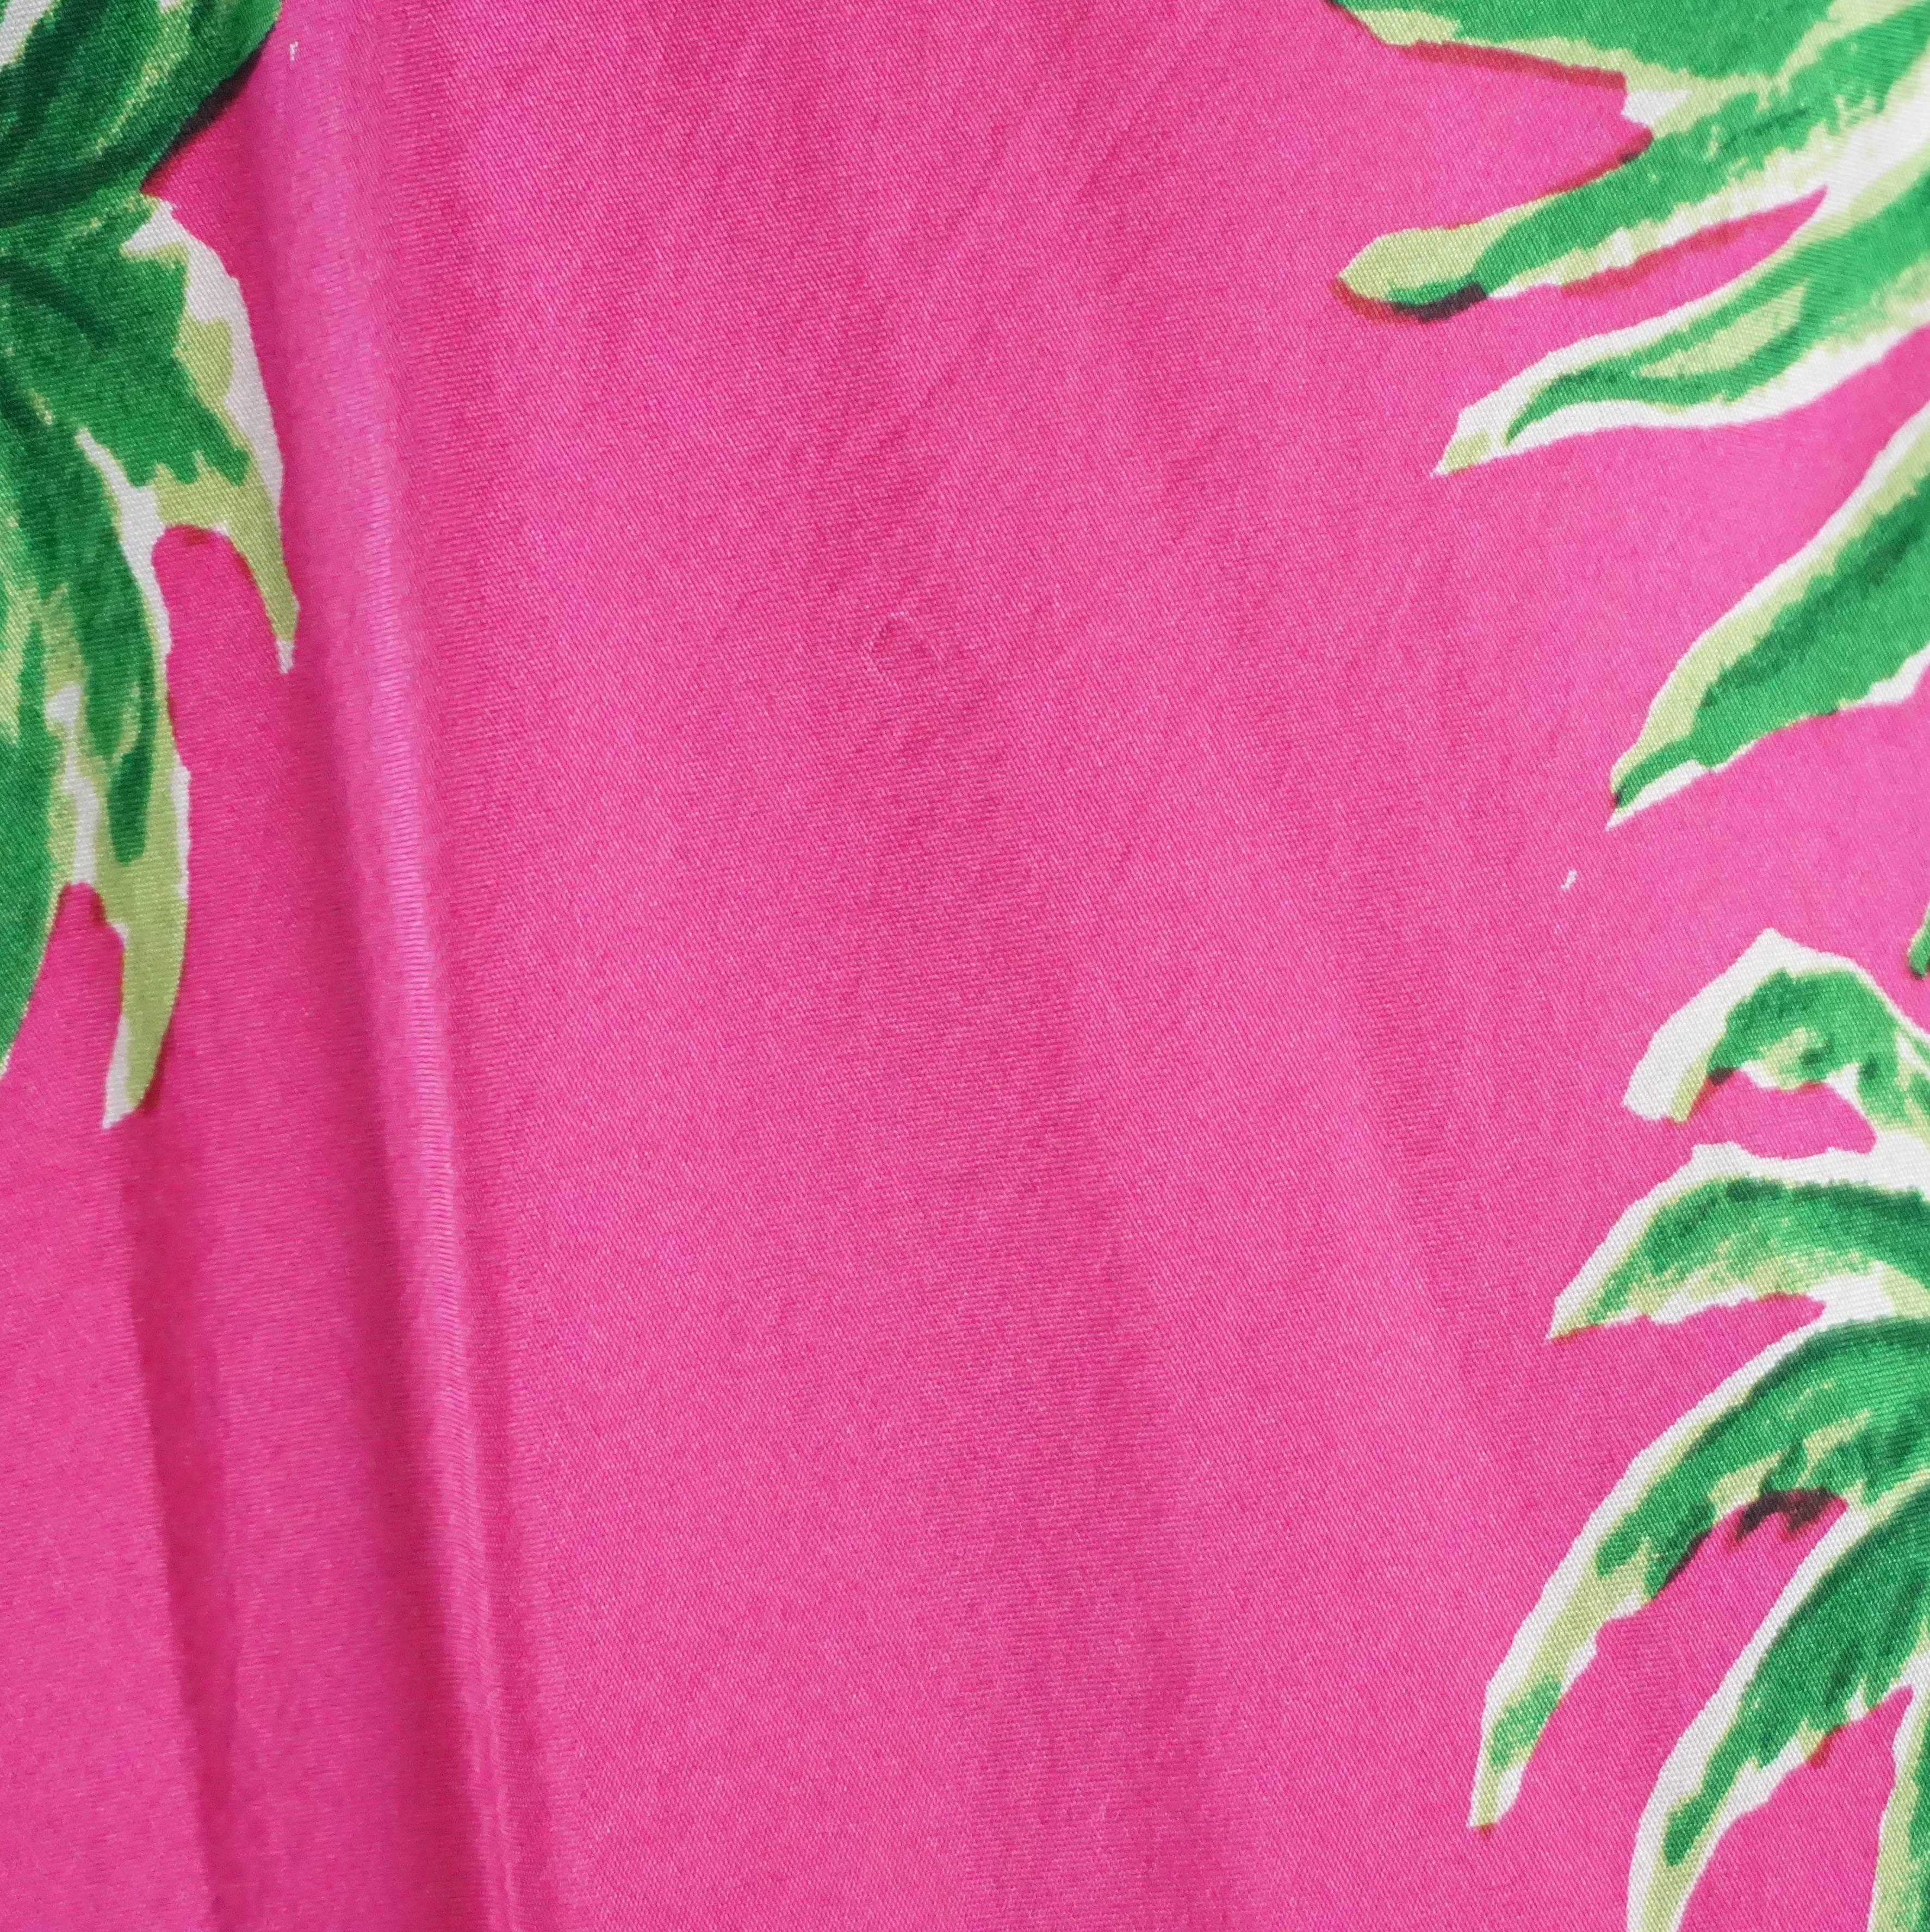 Ralph Lauren Pink Tropical Print Ruffle Dress - 4 In Good Condition For Sale In West Palm Beach, FL